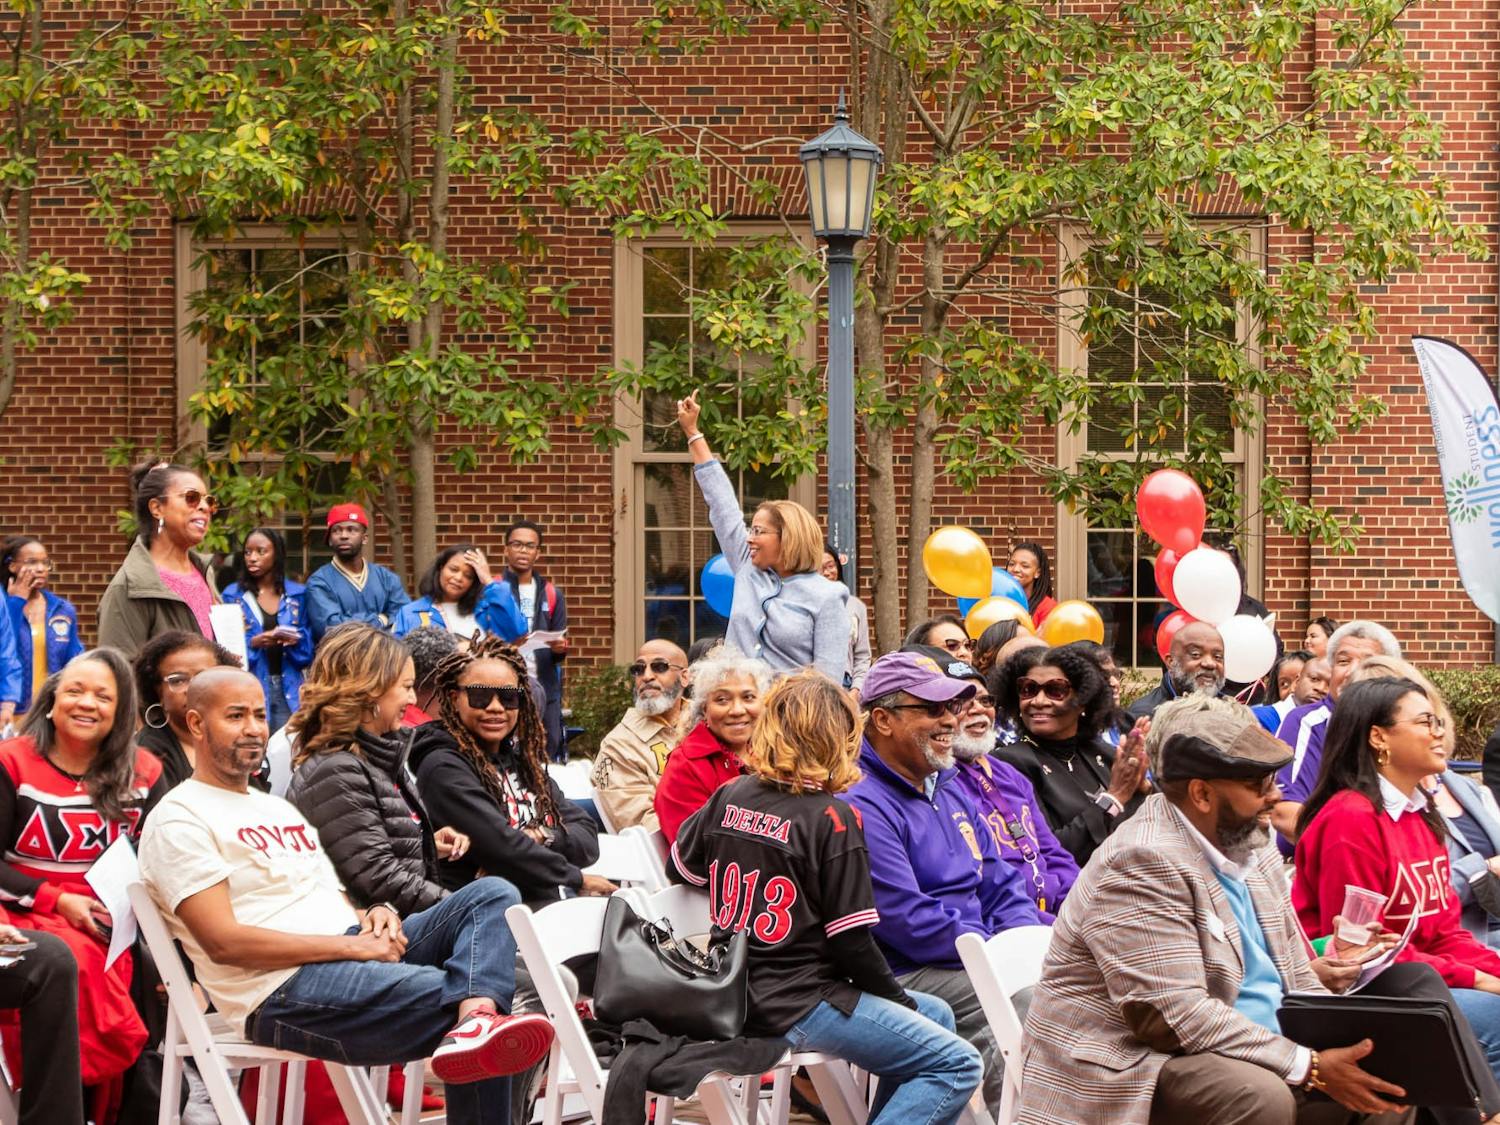 Dozens of people gather in celebration of the opening of the NPHC Legacy Plaza on UNC's campus. The plaza represents the University's nine historically Black fraternities and sororities for their contributions to the campus community.